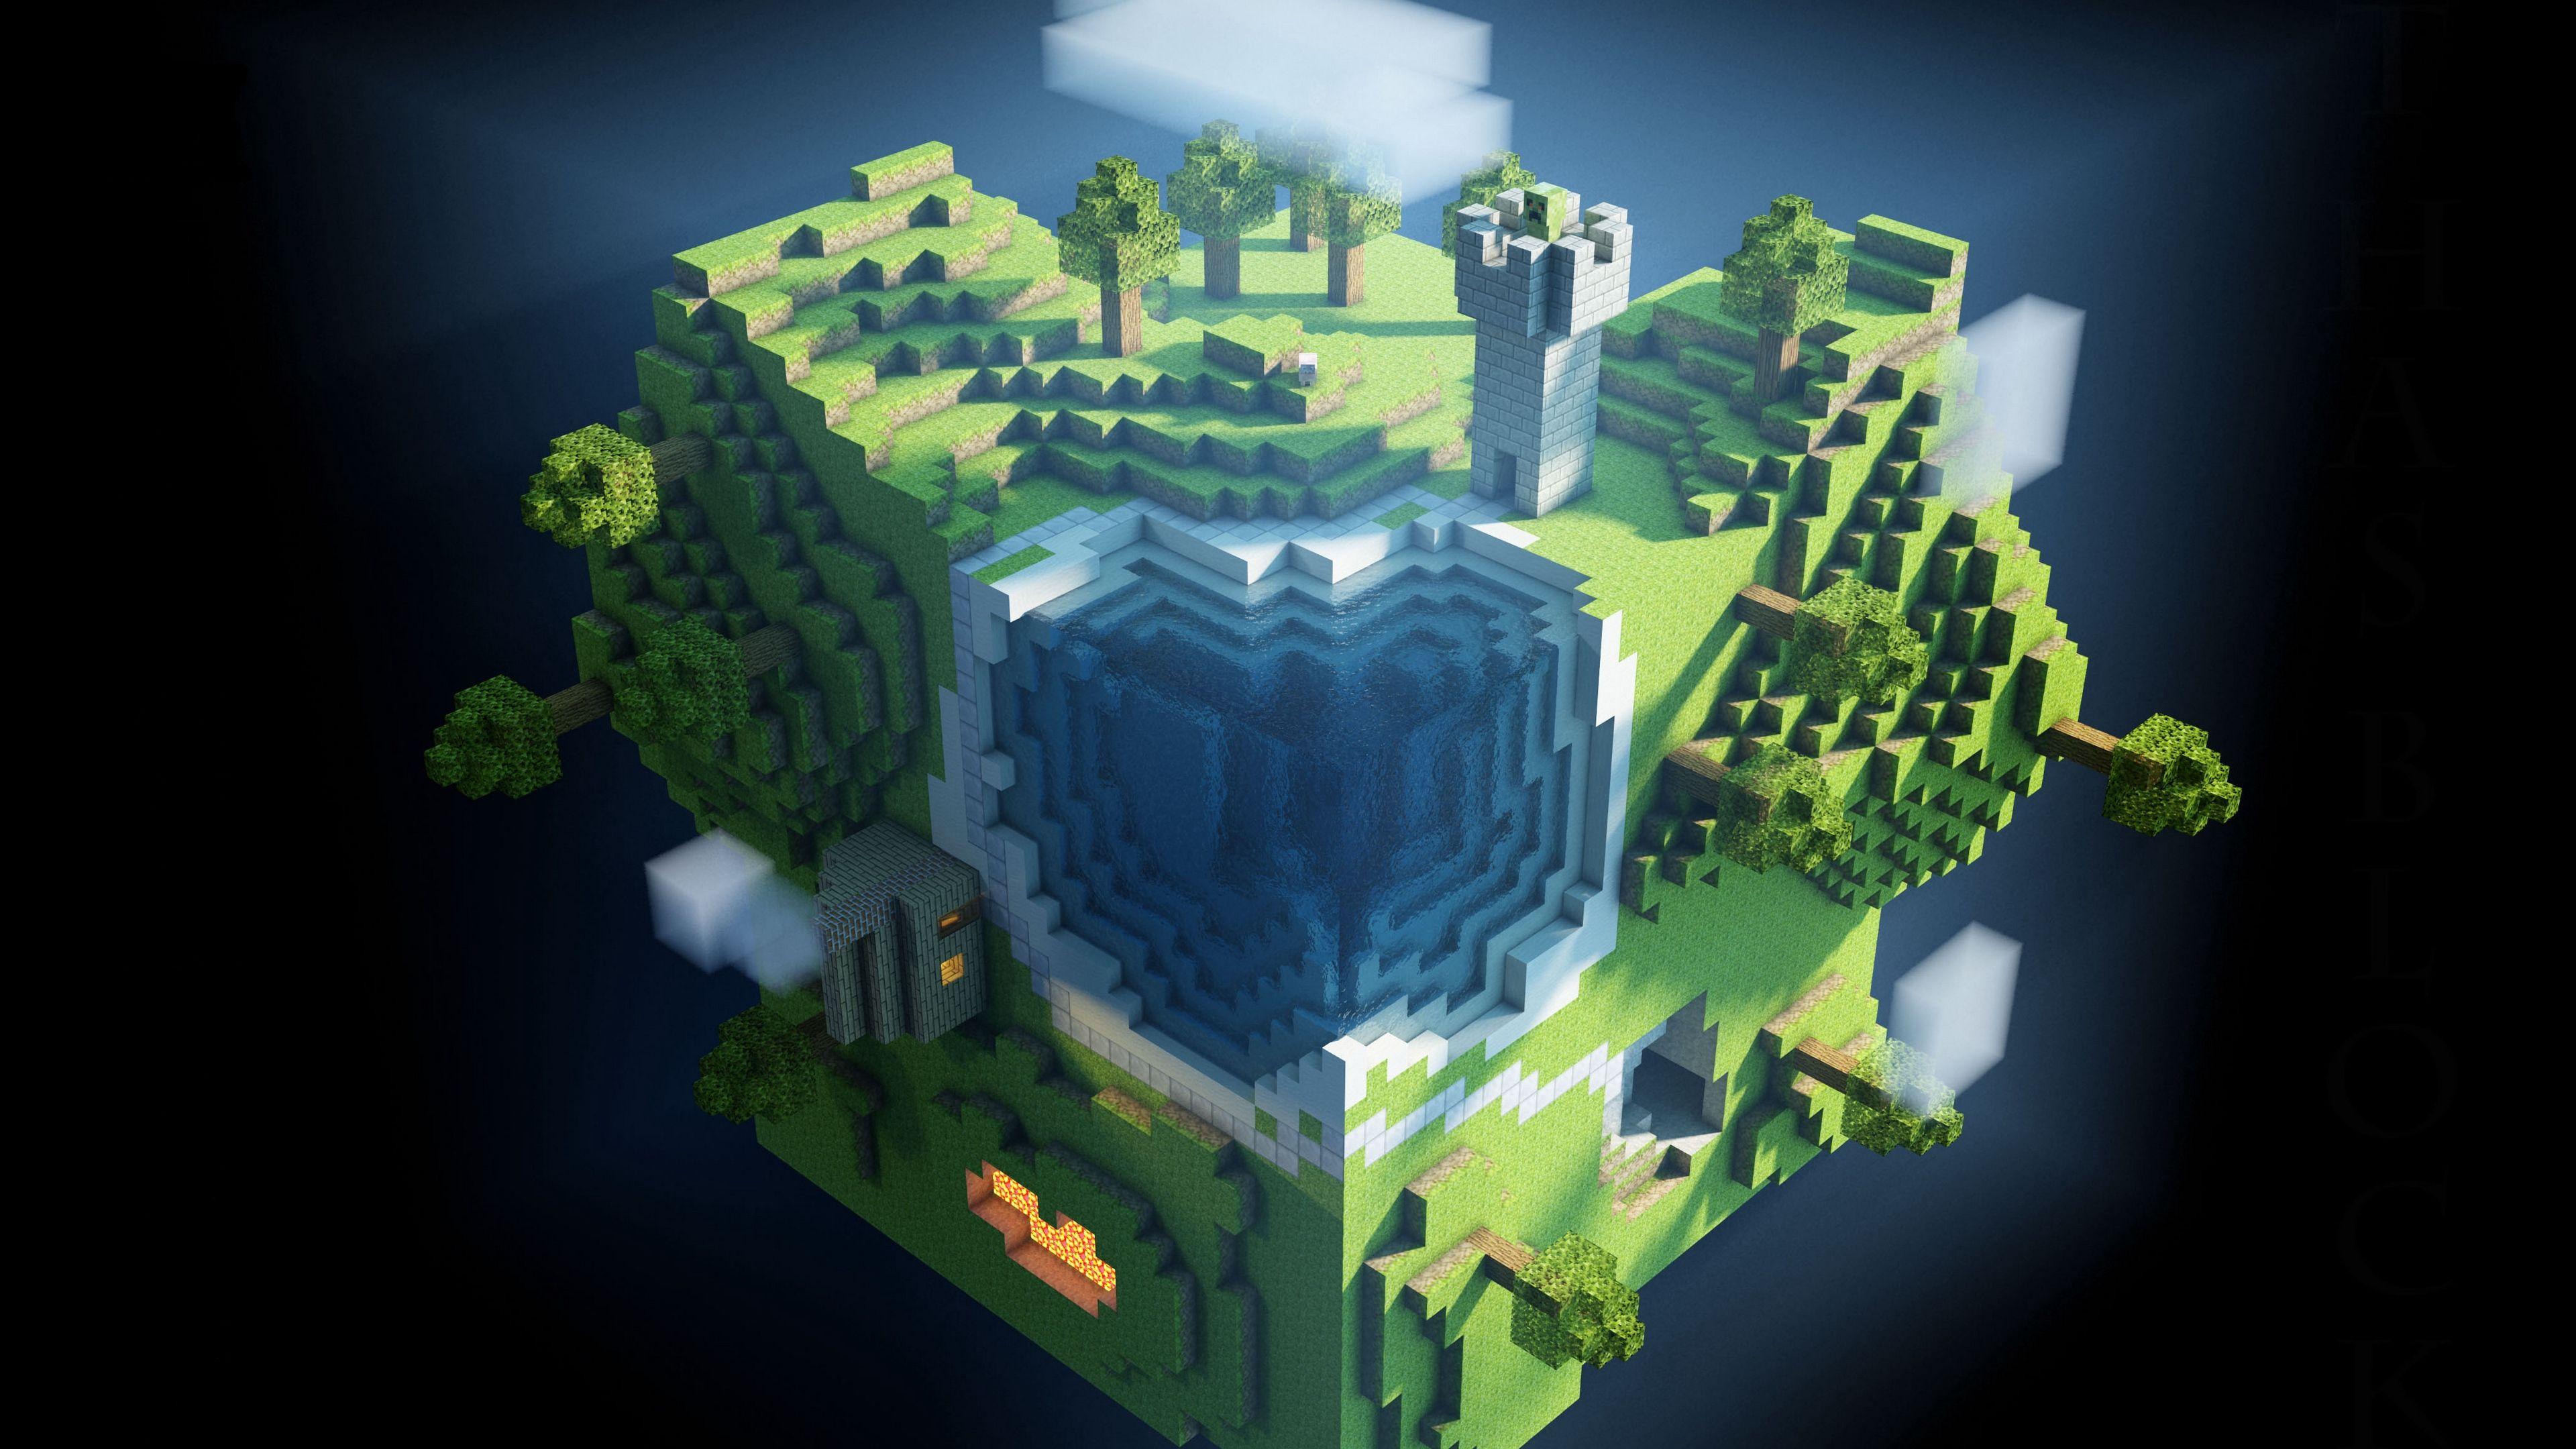 Download wallpapers 3840x2160 minecraft, planet, cube, cubes, world